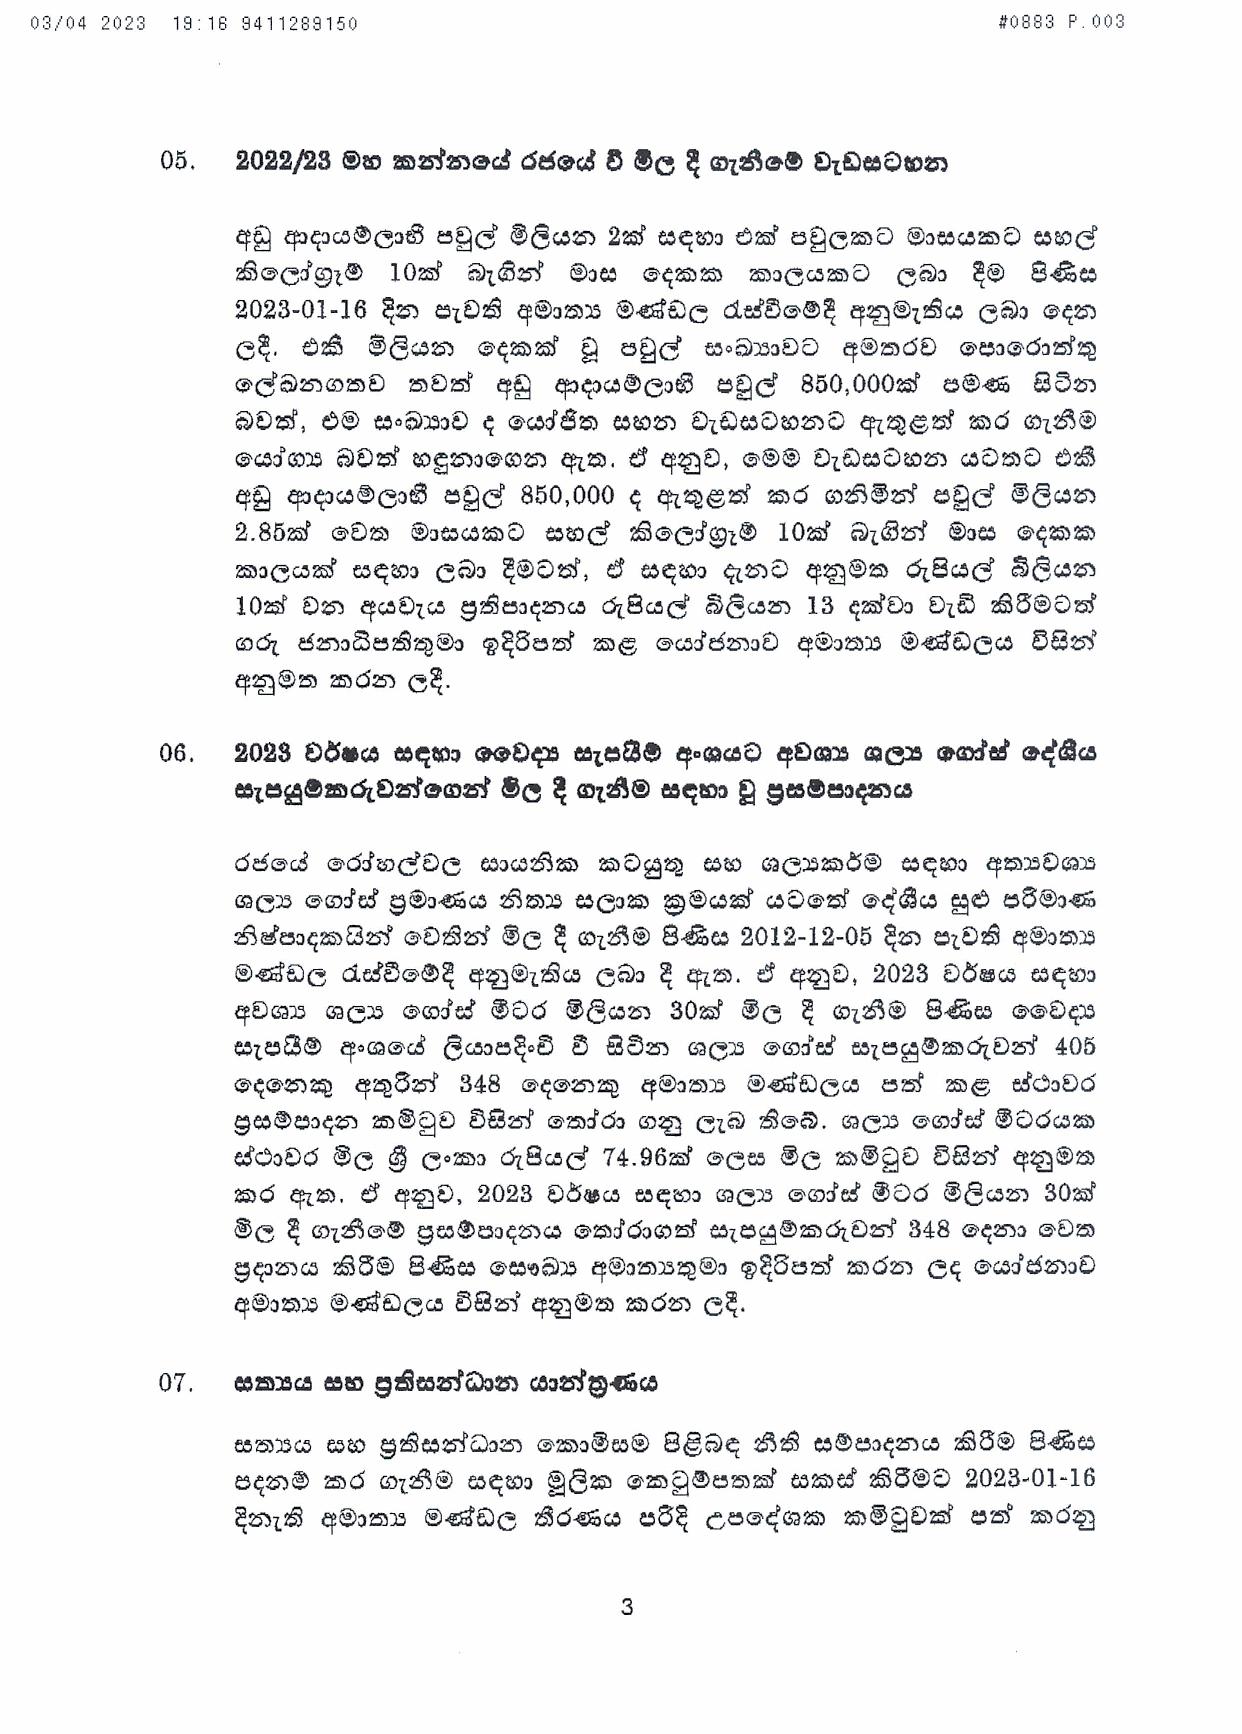 Cabinet Decision on 03.04.2023 page 003